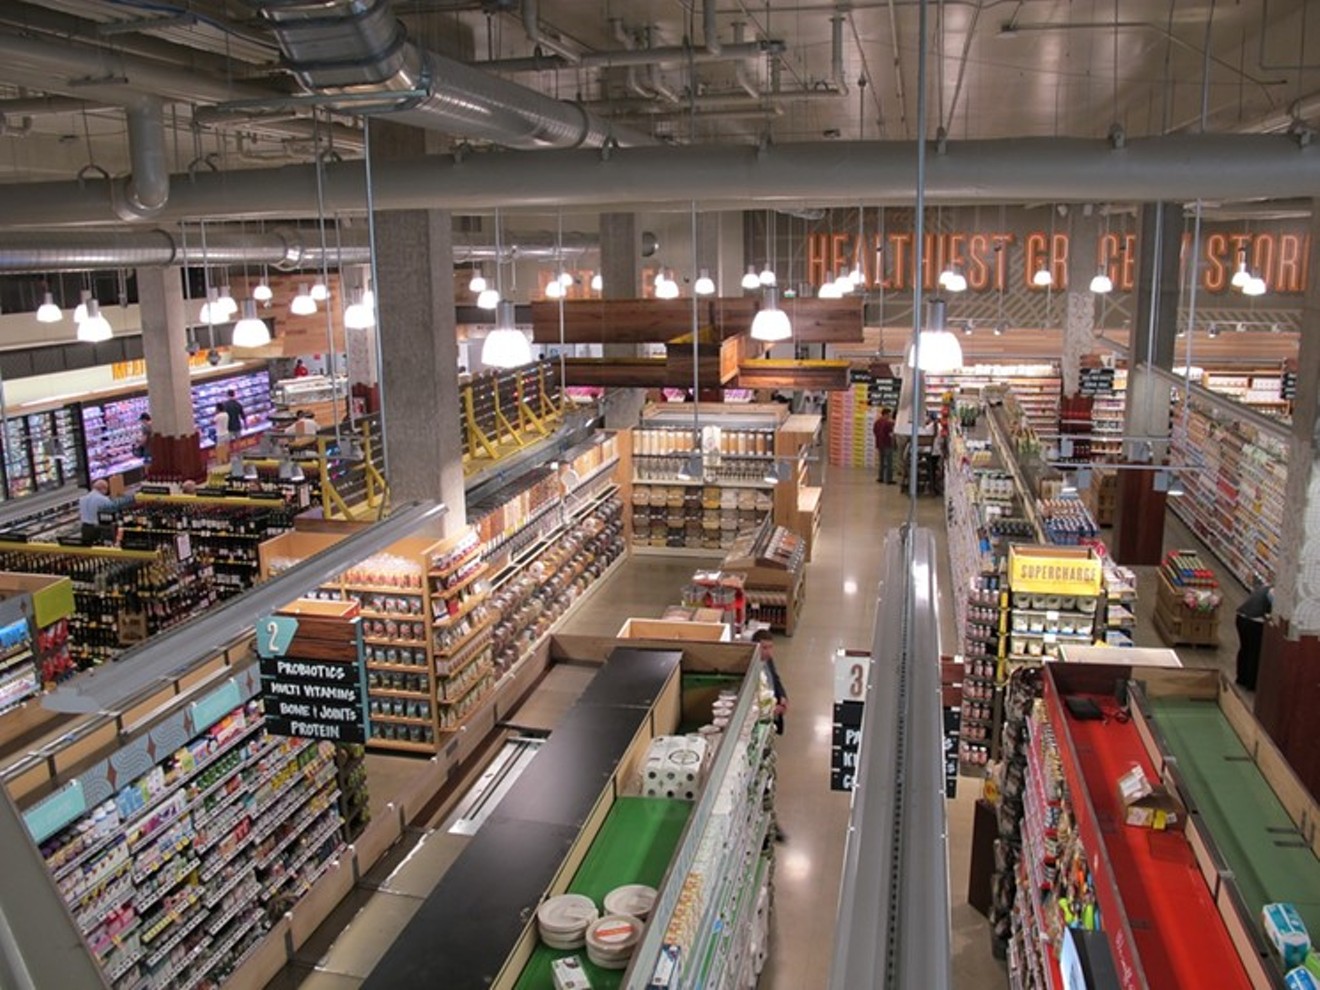 https://media2.dallasobserver.com/dal/imager/amazon-launches-free-two-hour-whole-foods-grocery-and-booze-delivery-in-dallas/u/magnum/10351276/wholefoods_observer.jpg?cb=1642545895